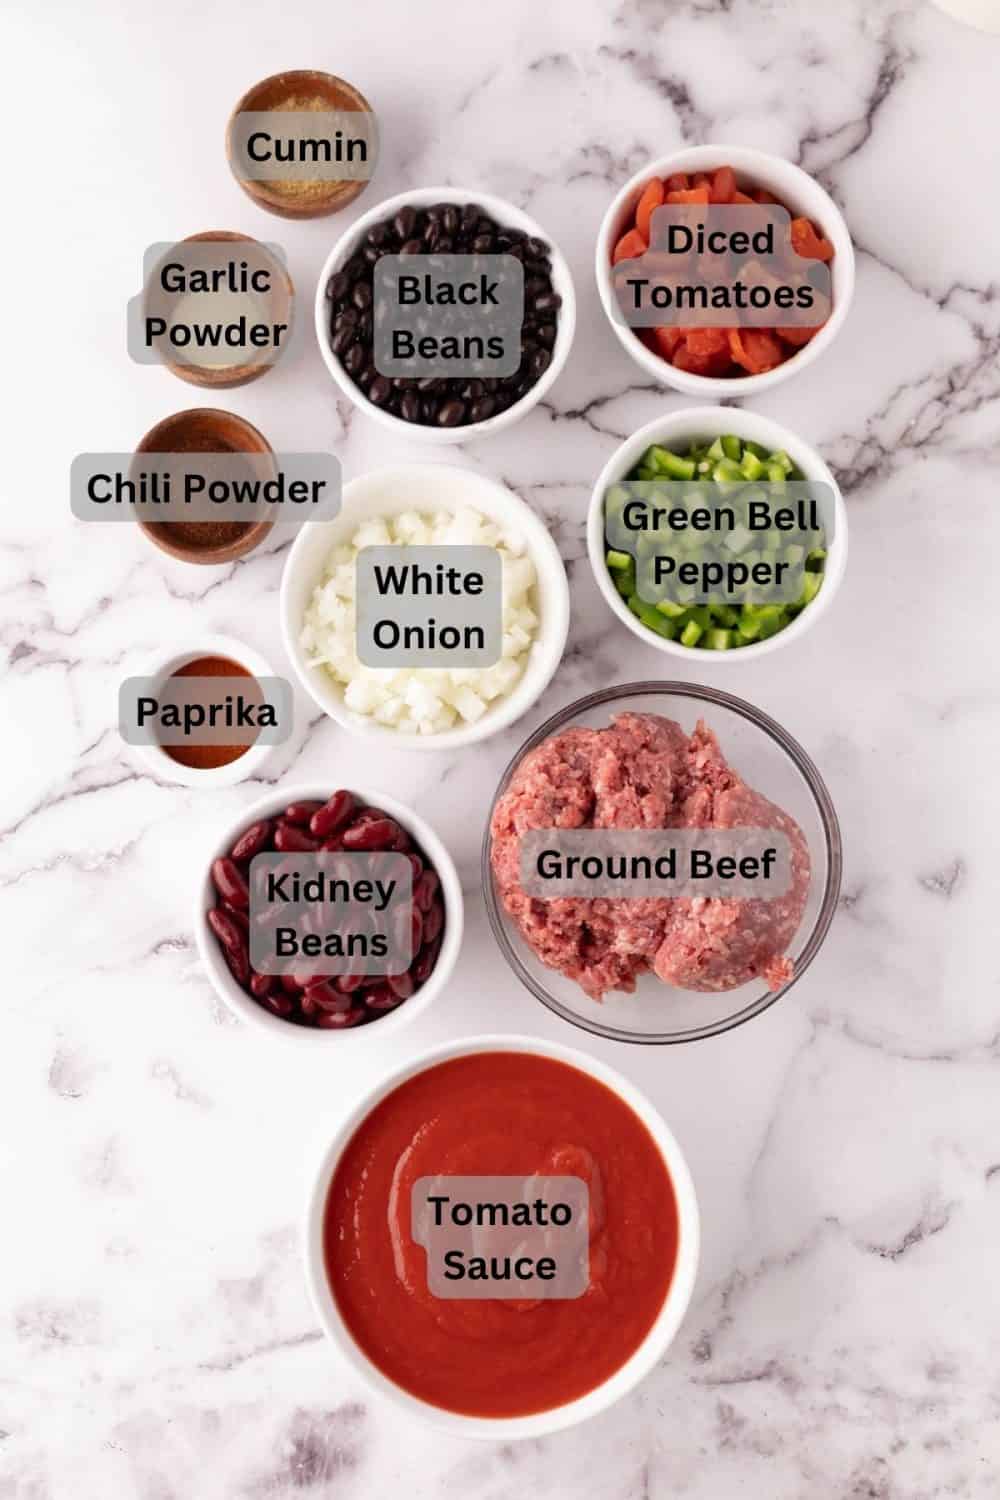 Digitally labeled ingredients for wendys chili.